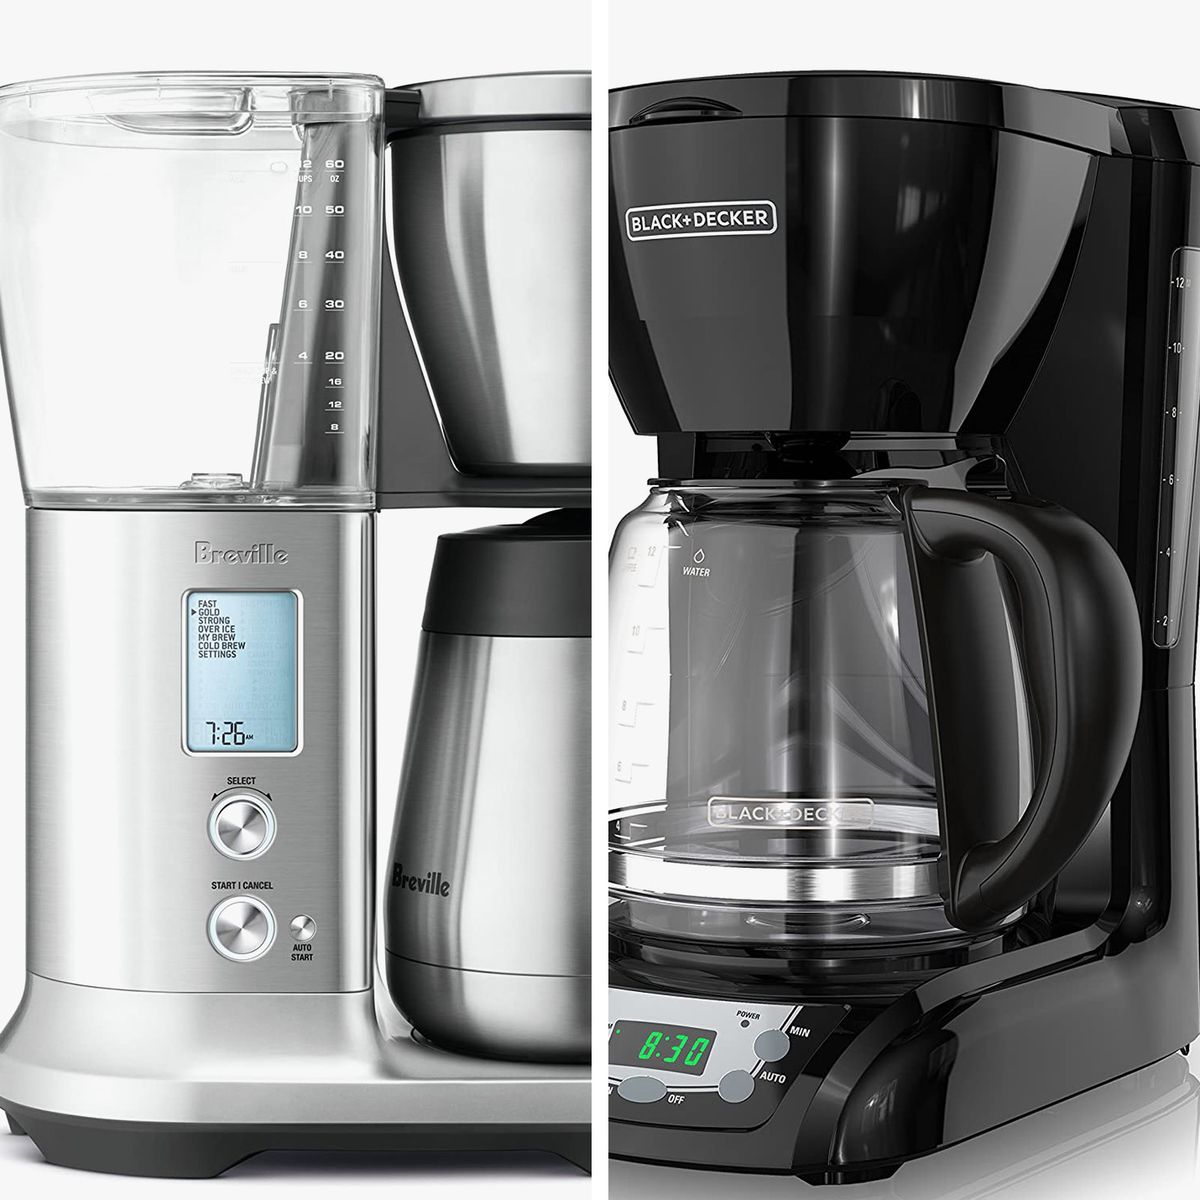 What's the Difference Between a $50 and $300 Coffee Maker?